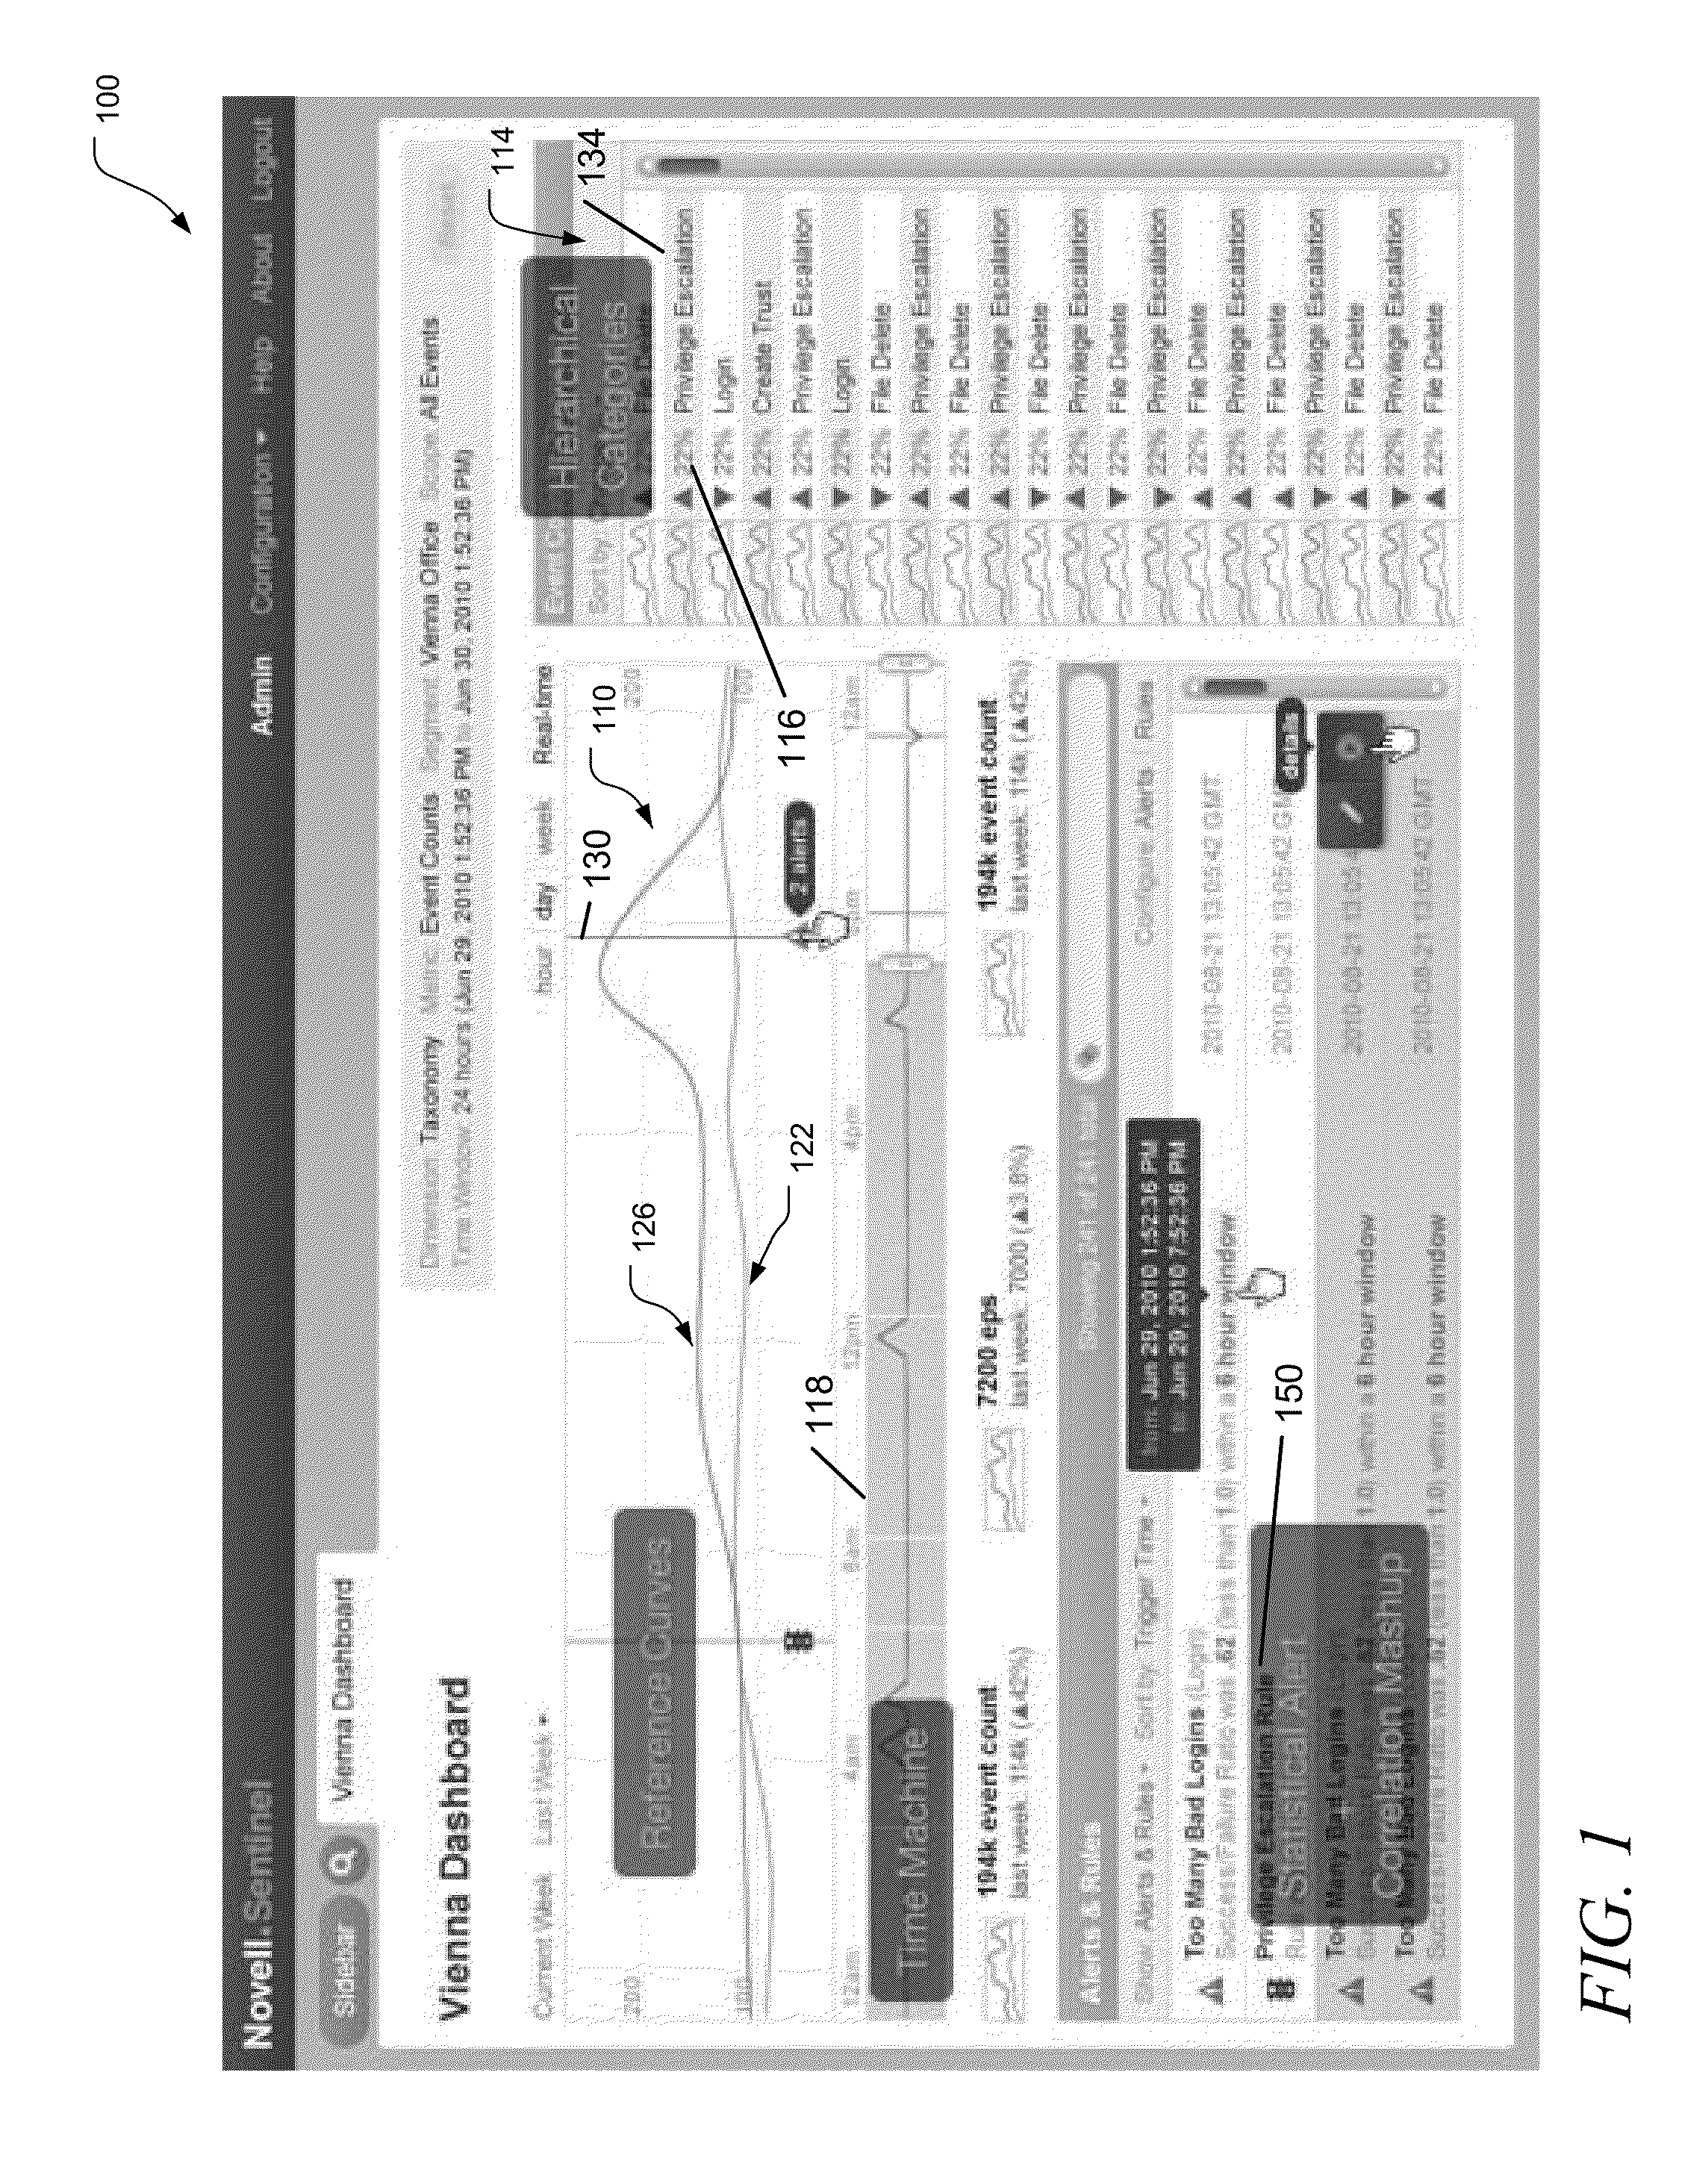 Event management apparatus, systems, and methods